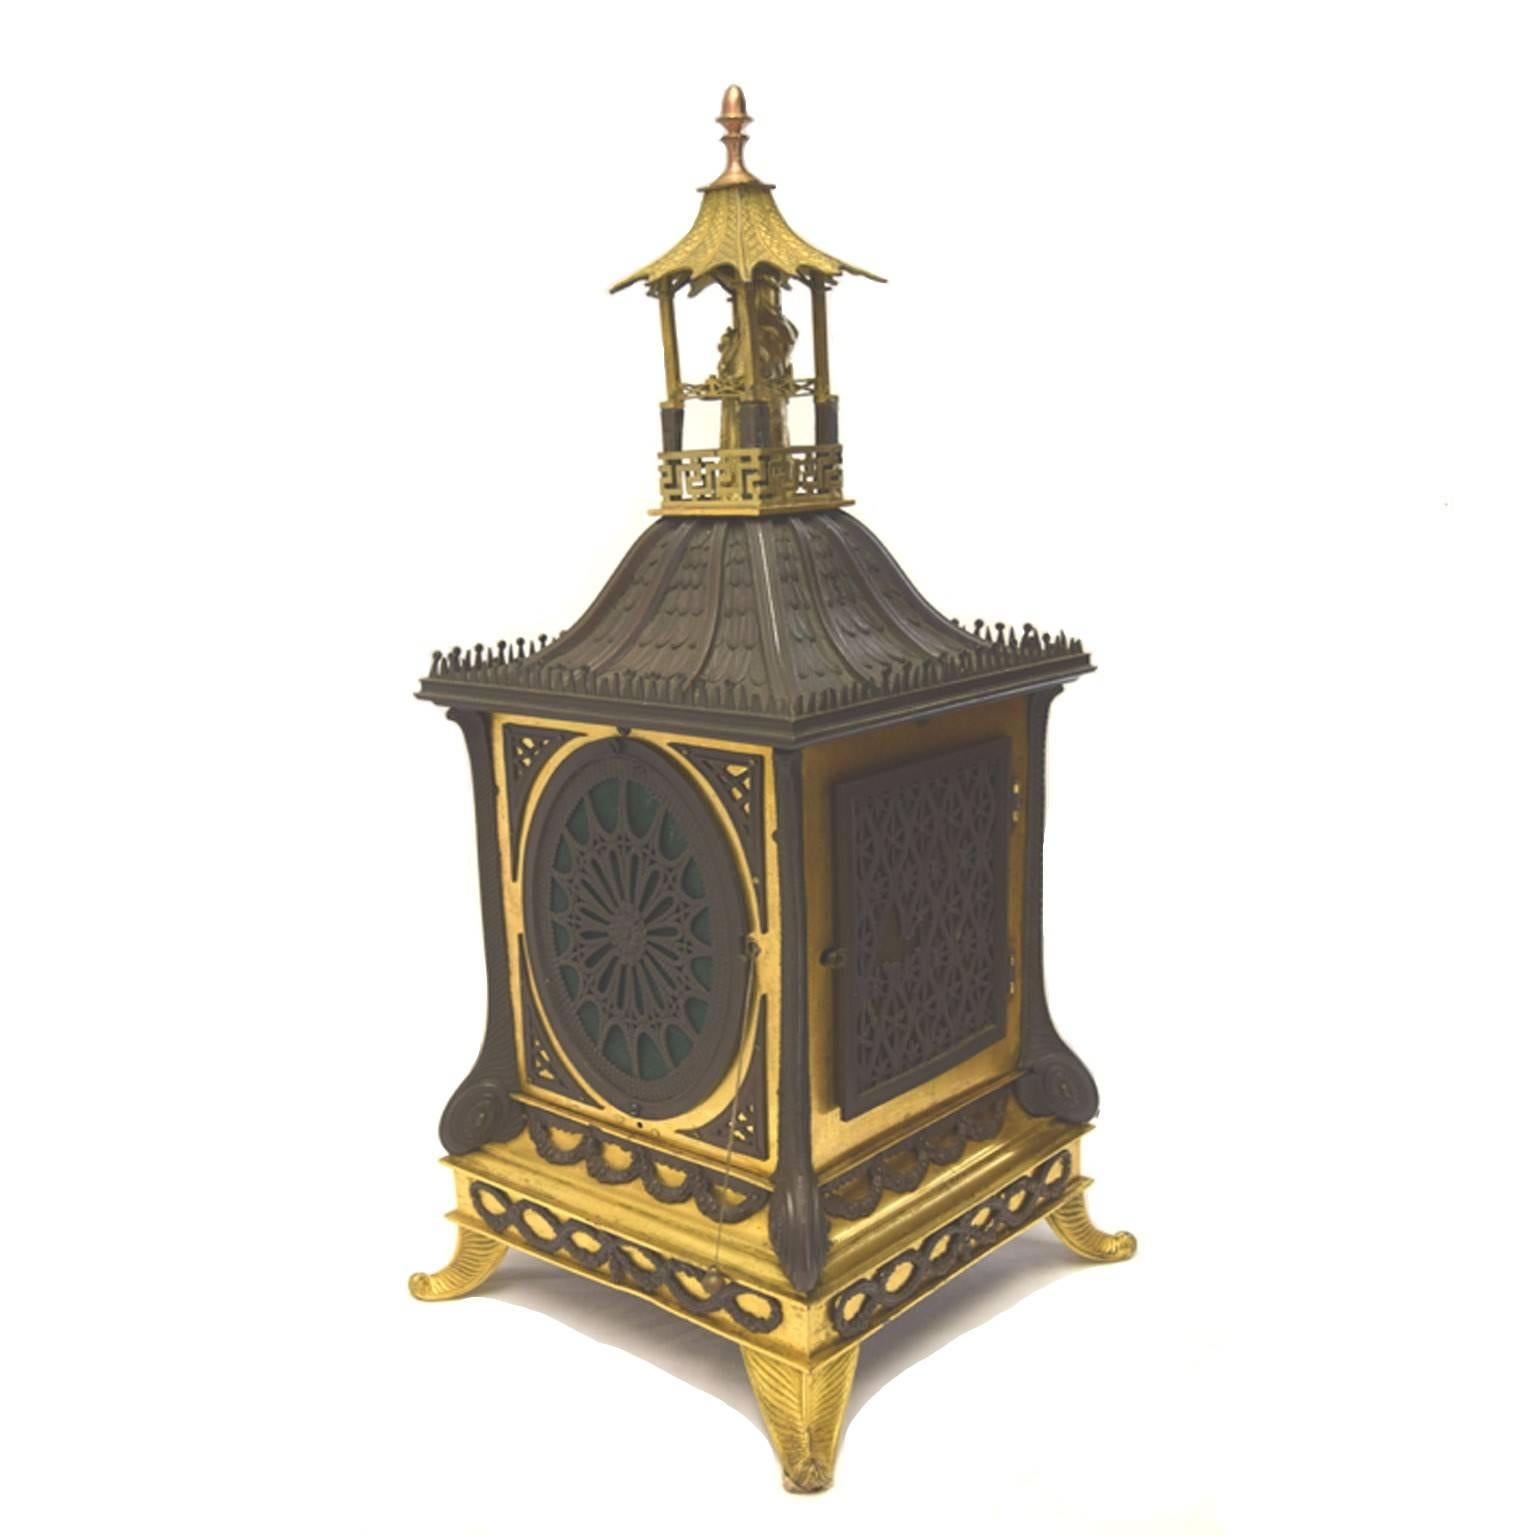 Antique English bronze bracket clock by J & A. Jump I Old Bond Street, London, repeater, silvered dial, the neoclassical architectonic case modeled as a Chinese pagoda, with mandarin finial, striking two bells on scroll feet, circa 1845.